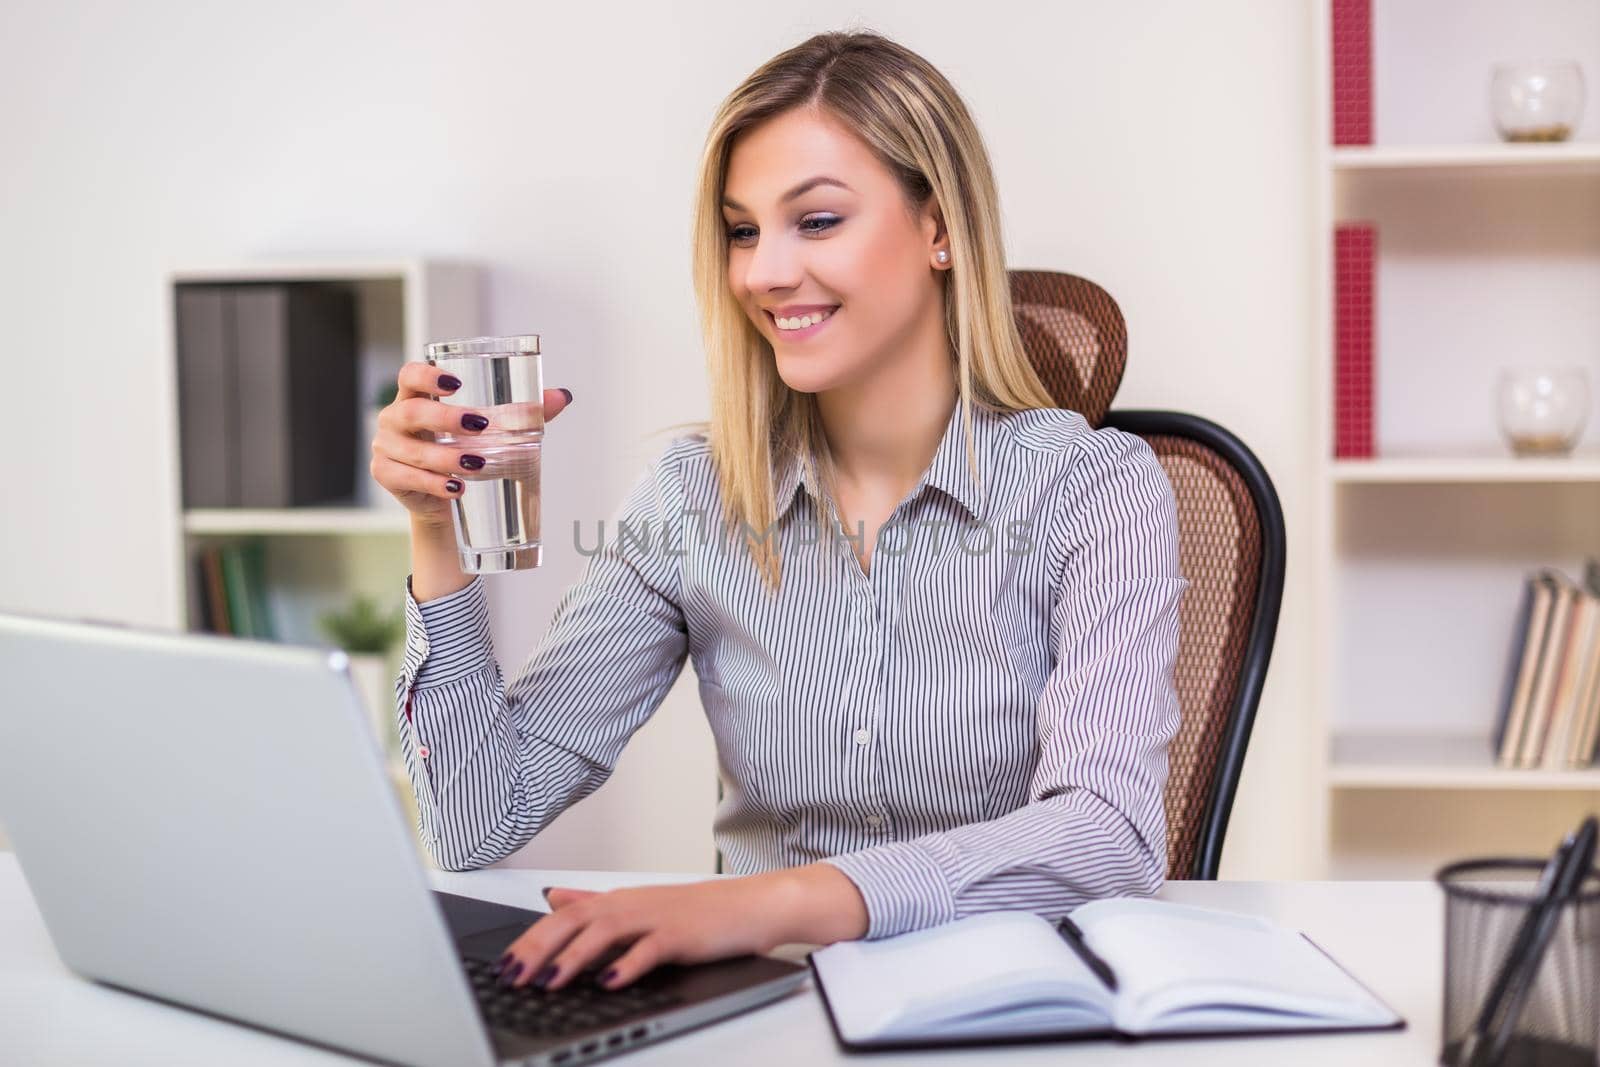 Businesswoman drinking water while working in her office.